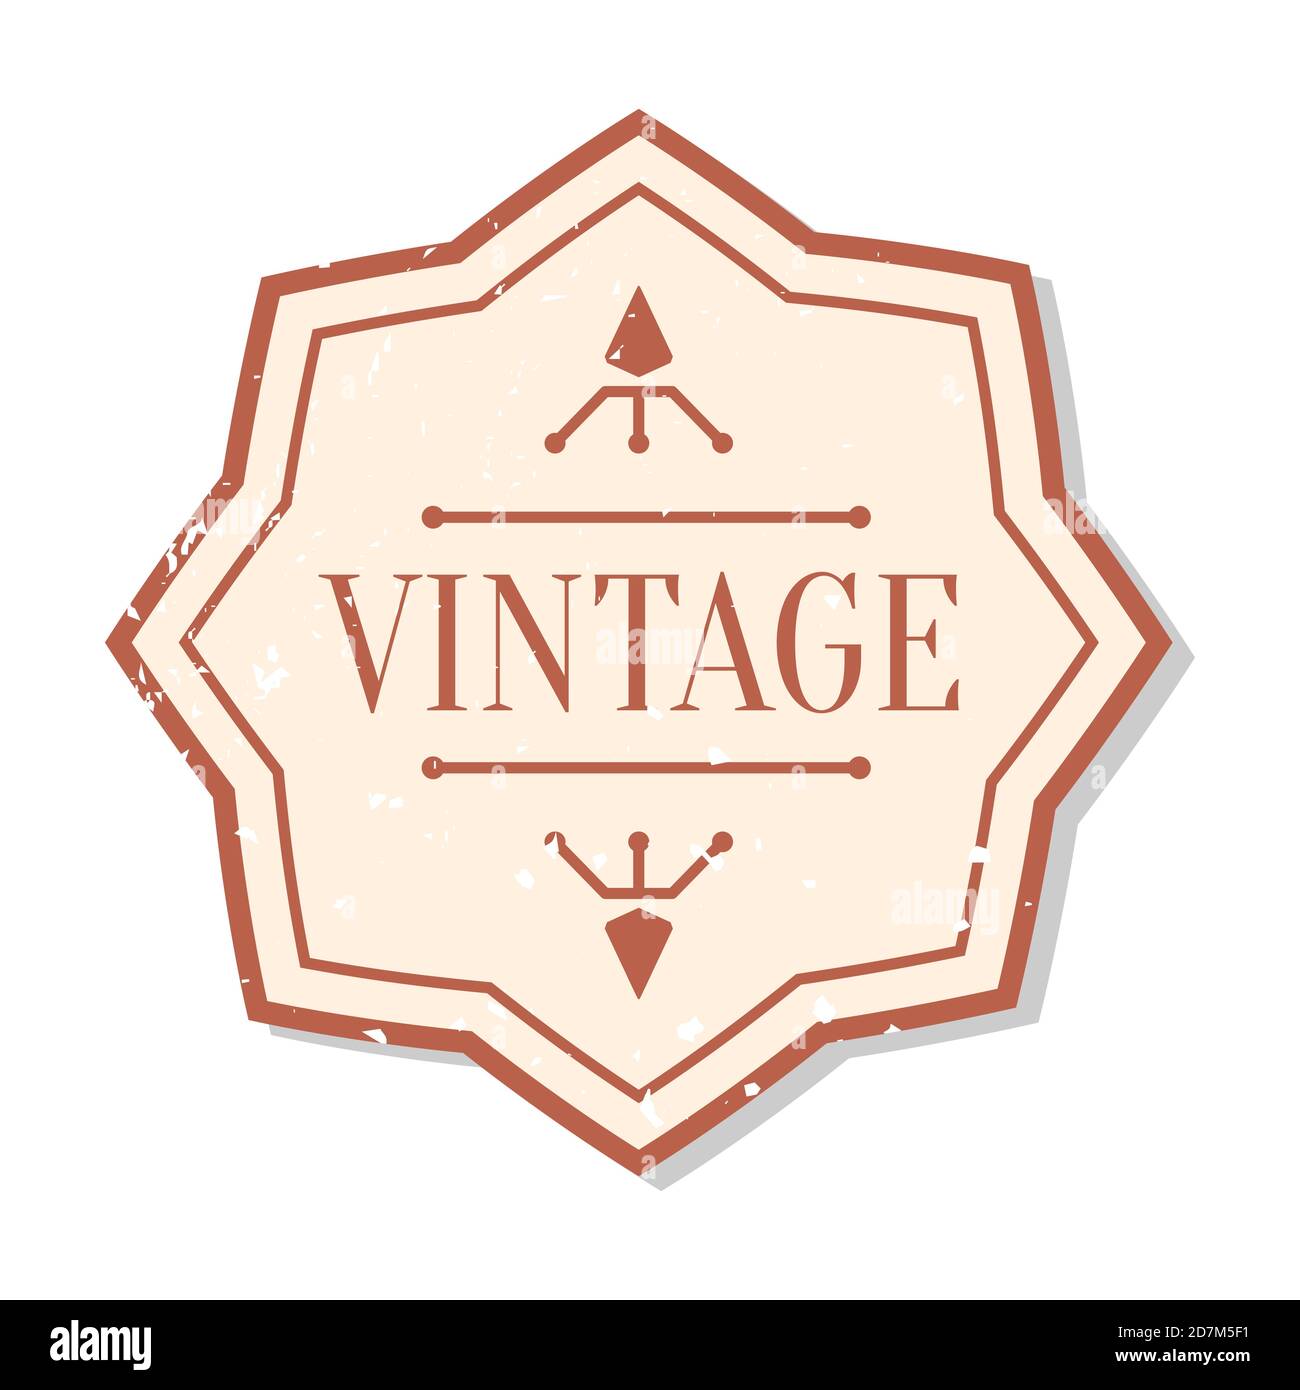 Closeup flat vintage colored label with grunge decorative element. Package sticker frame text template. Retro shape border banner, menu design. Single vintage badge isolated vector illustration Stock Vector